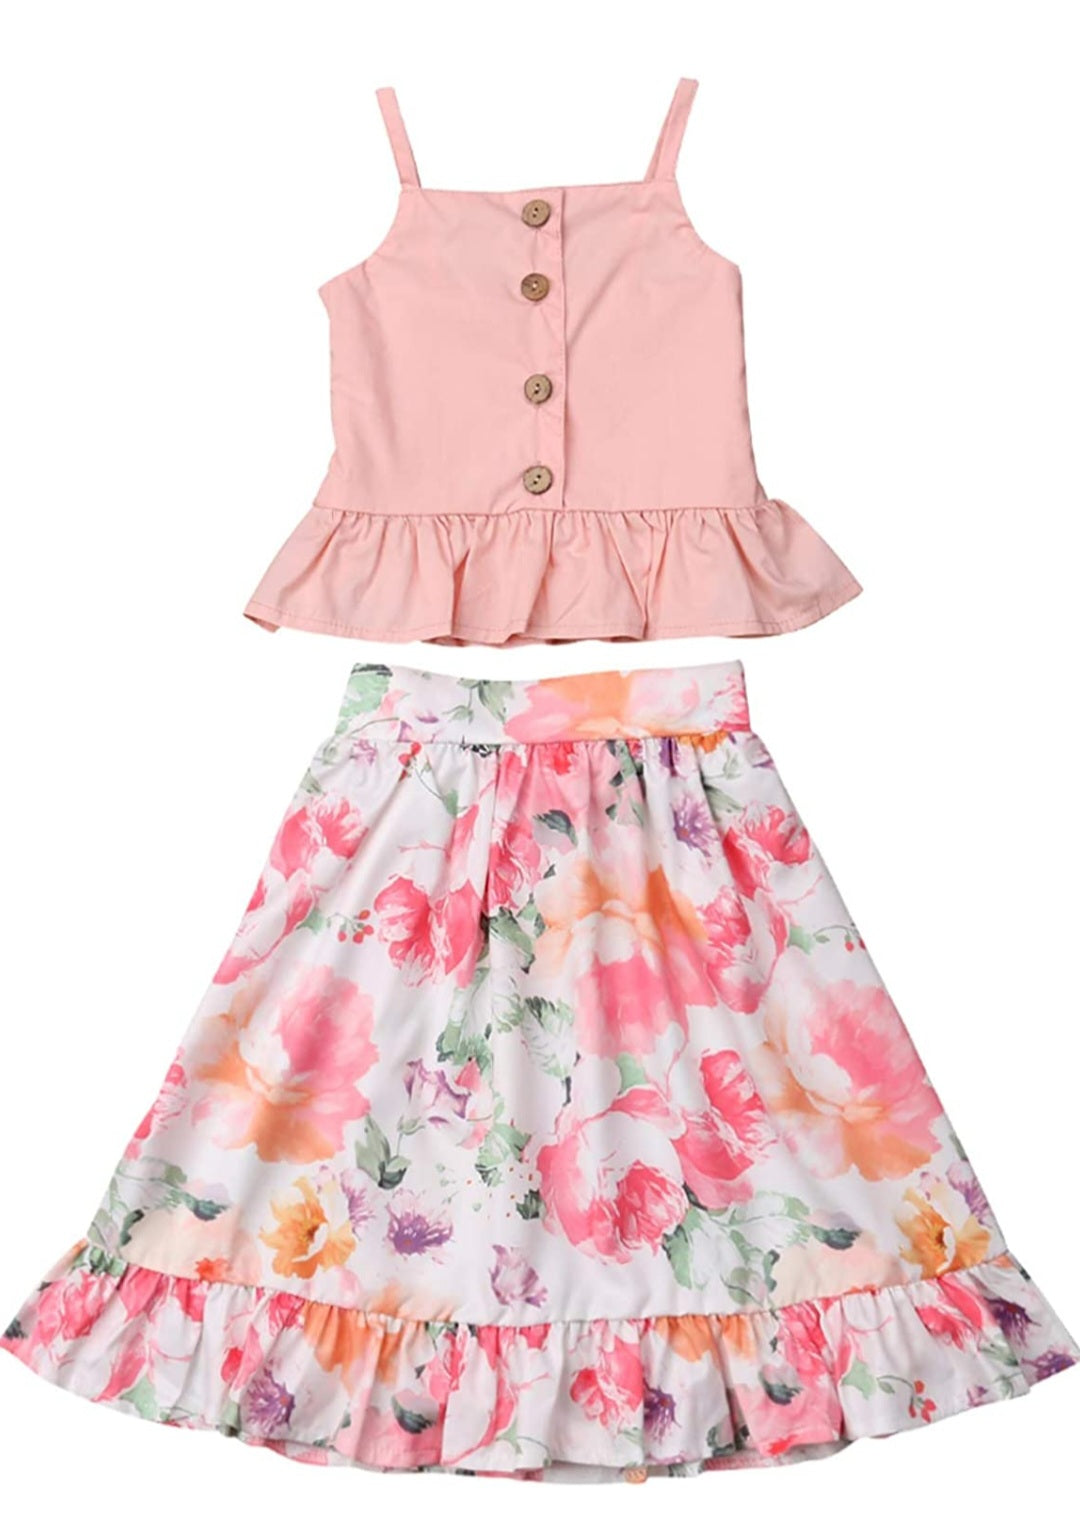 Floral Top and Skirt Set